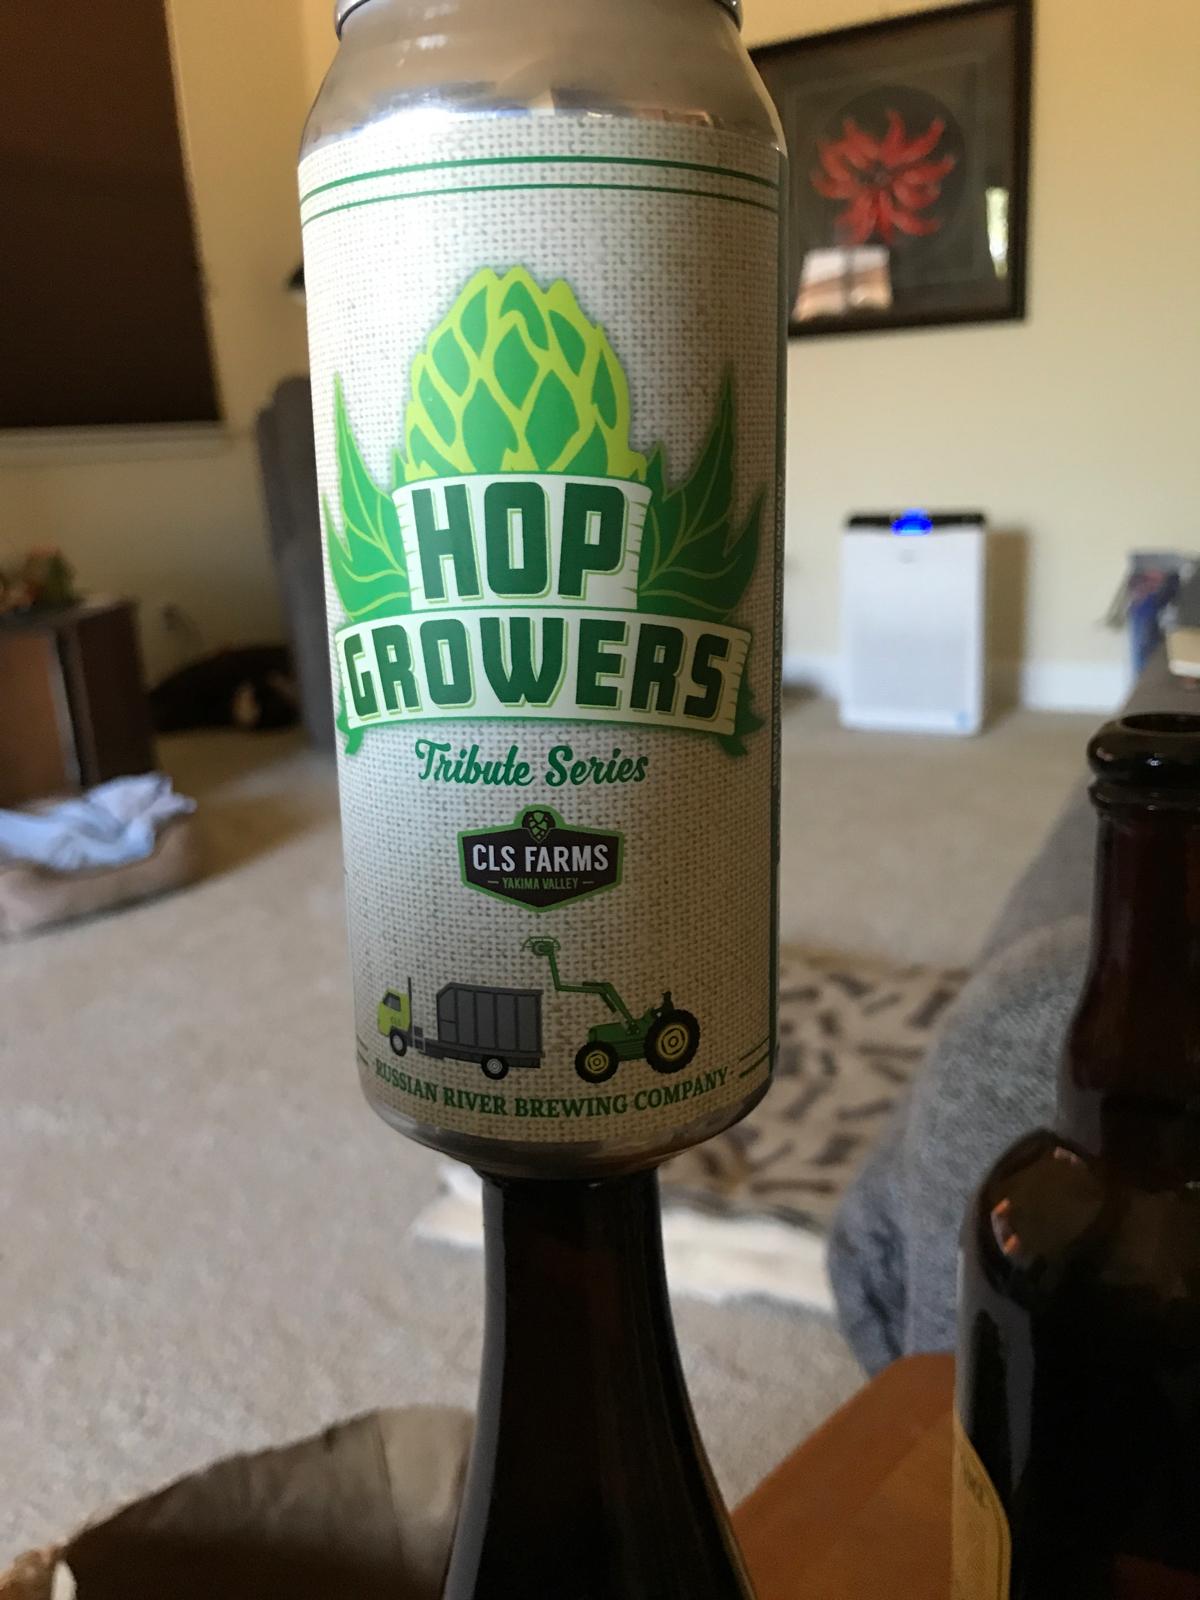 Hop Growers Tribute Series: CLS Farms